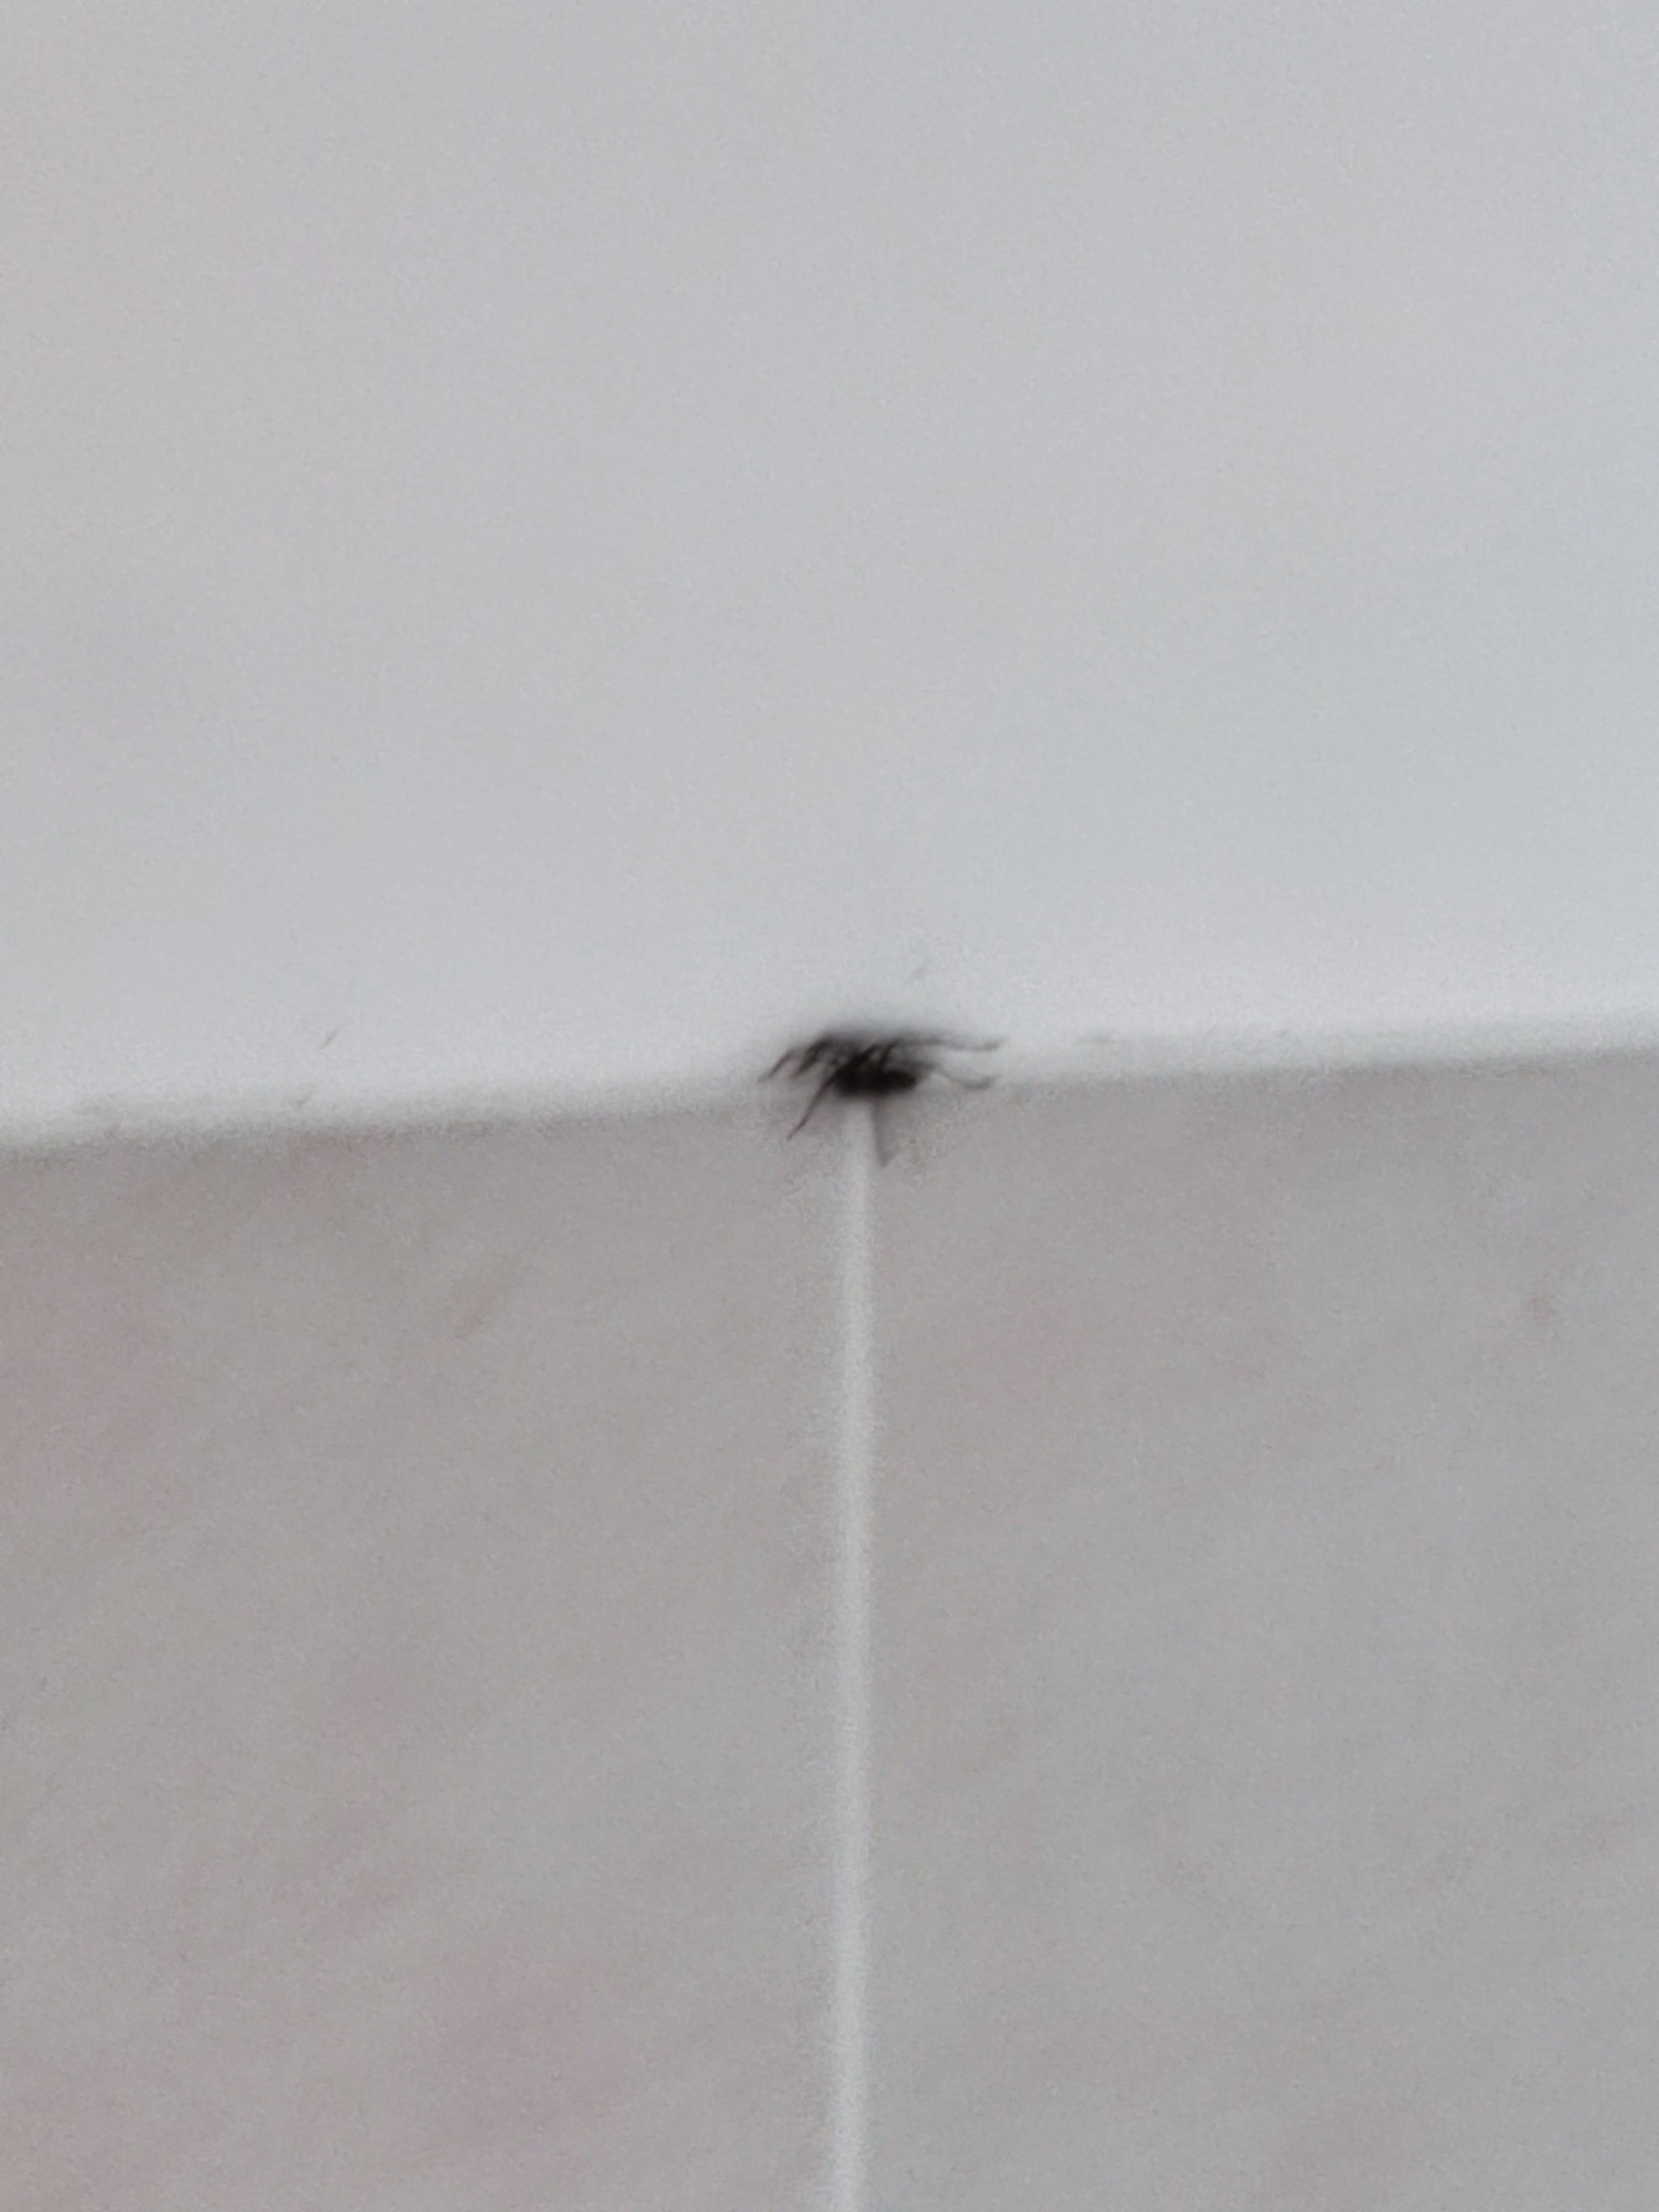 The giant giant house spider looking small